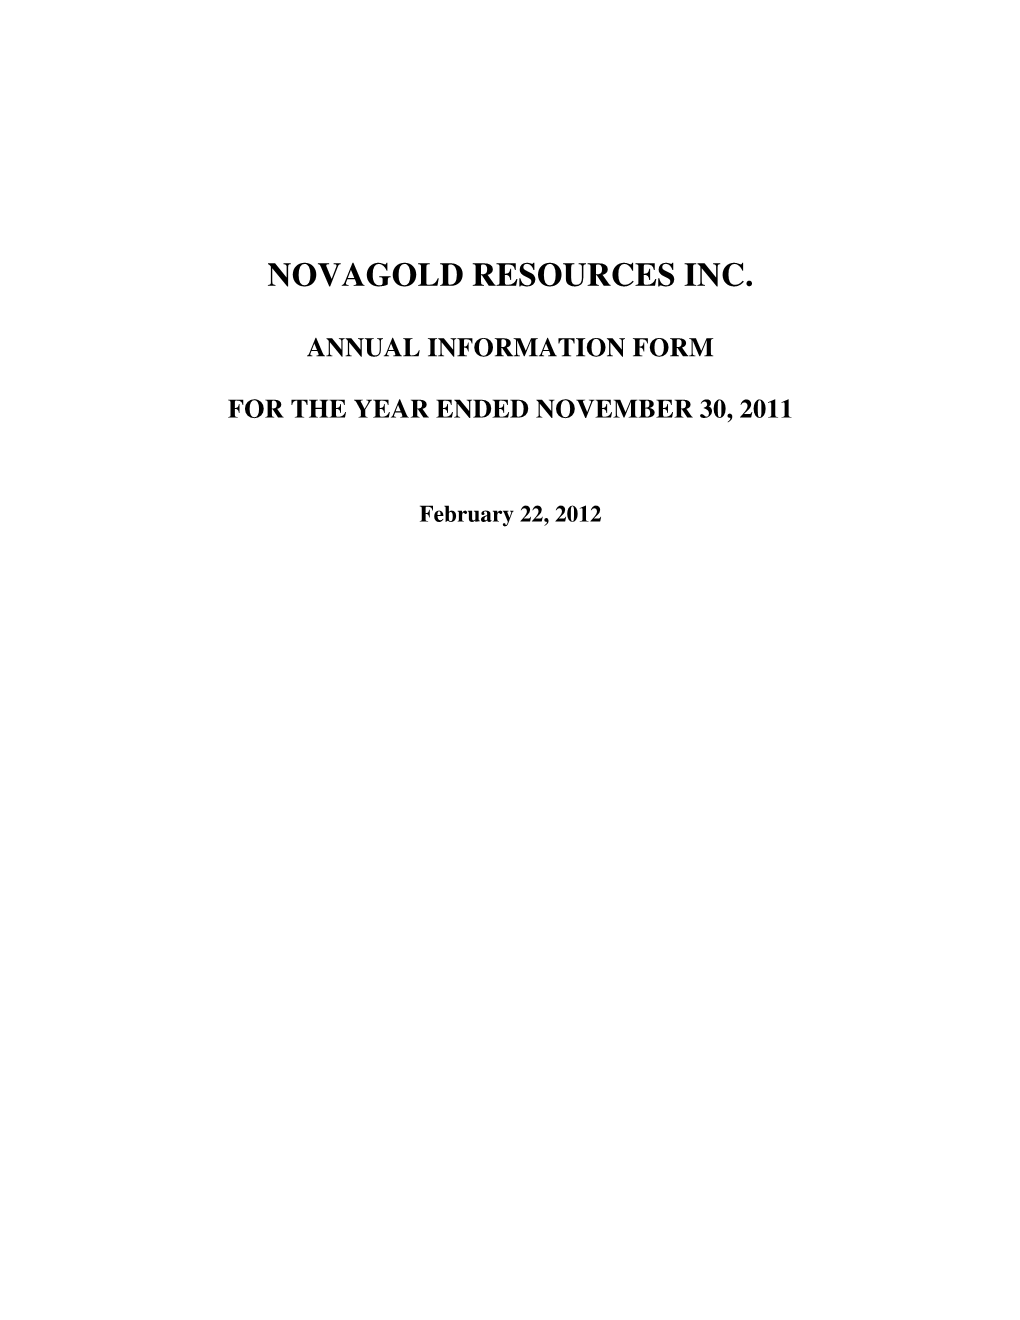 Novagold Resources Inc. Annual Information Form for the Year Ended